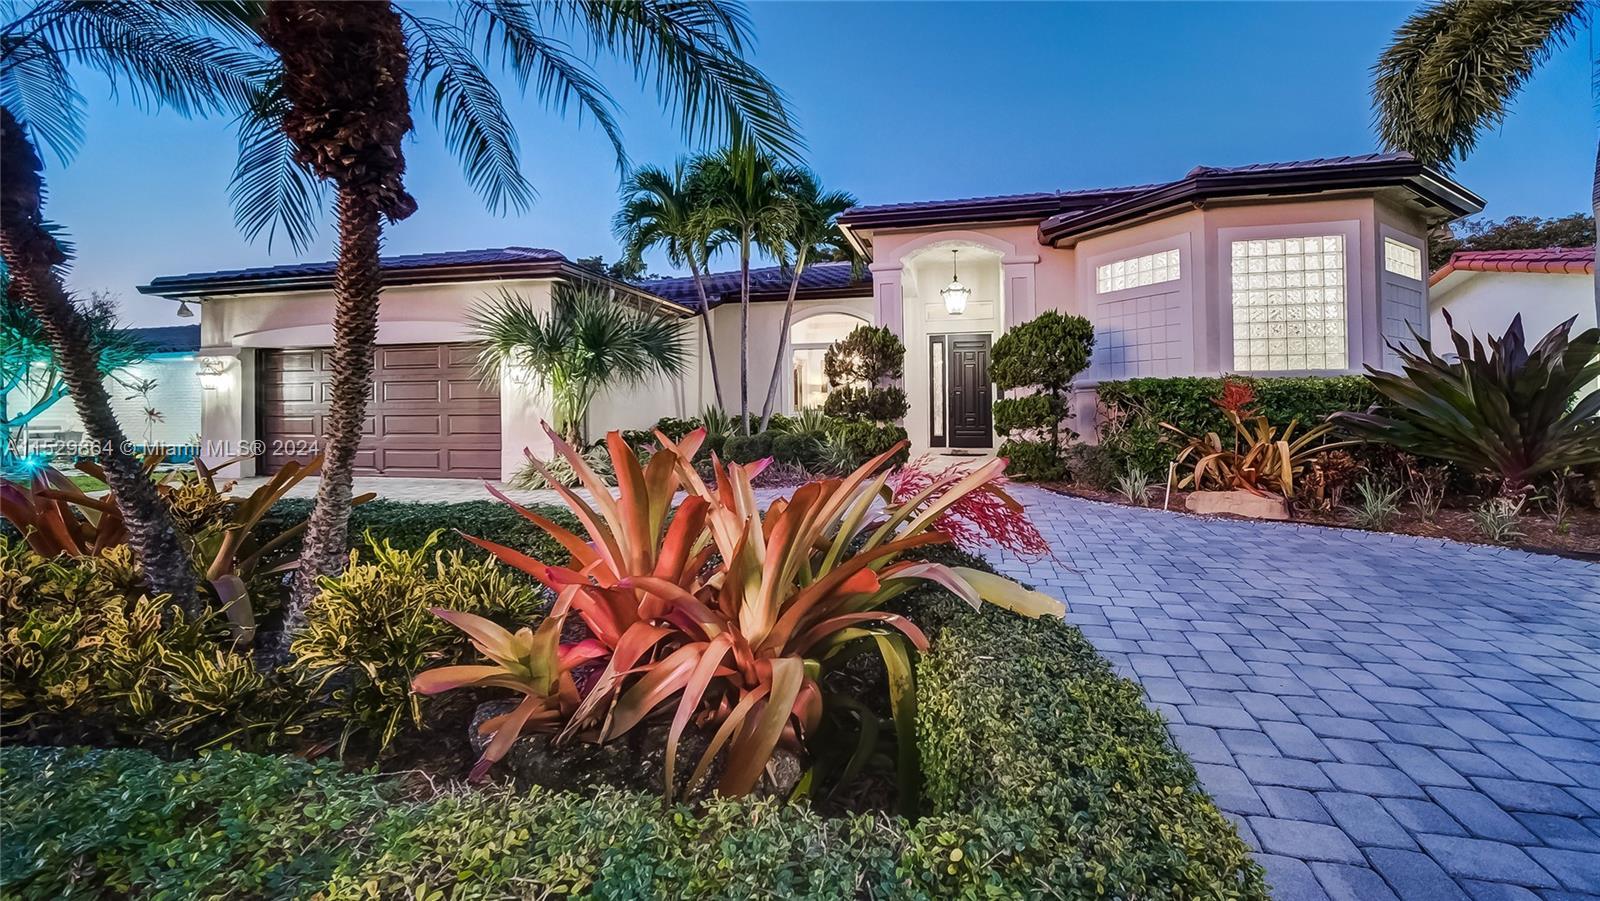 Photo of 6951 Loch Ness Dr in Miami Lakes, FL